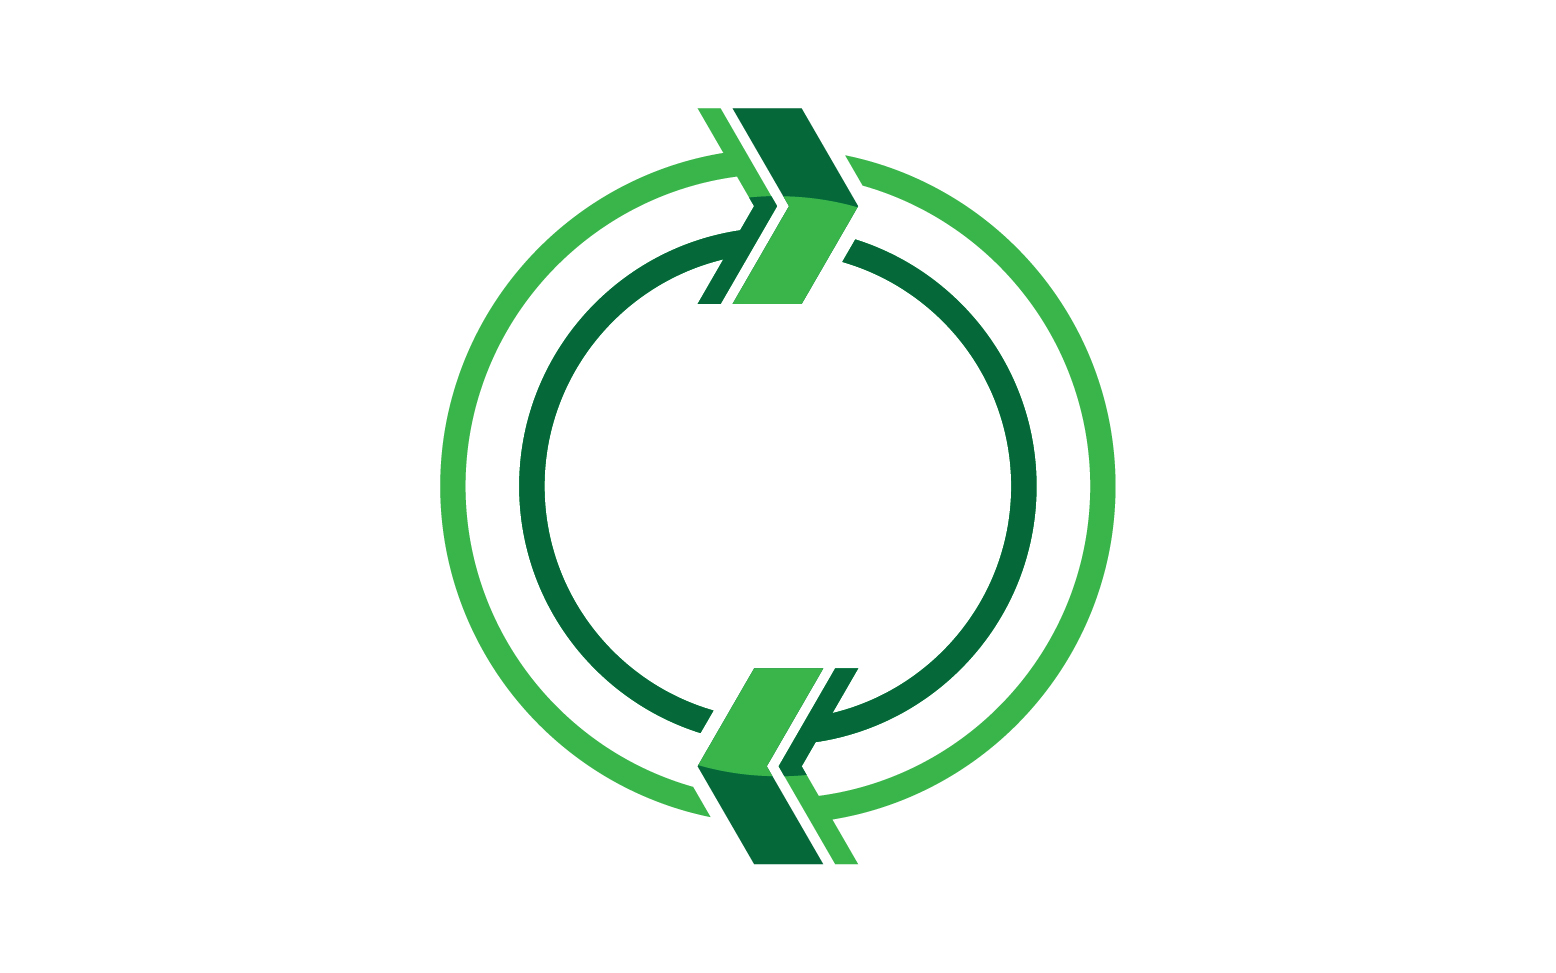 Recycle Symbol isolated on a white background v4